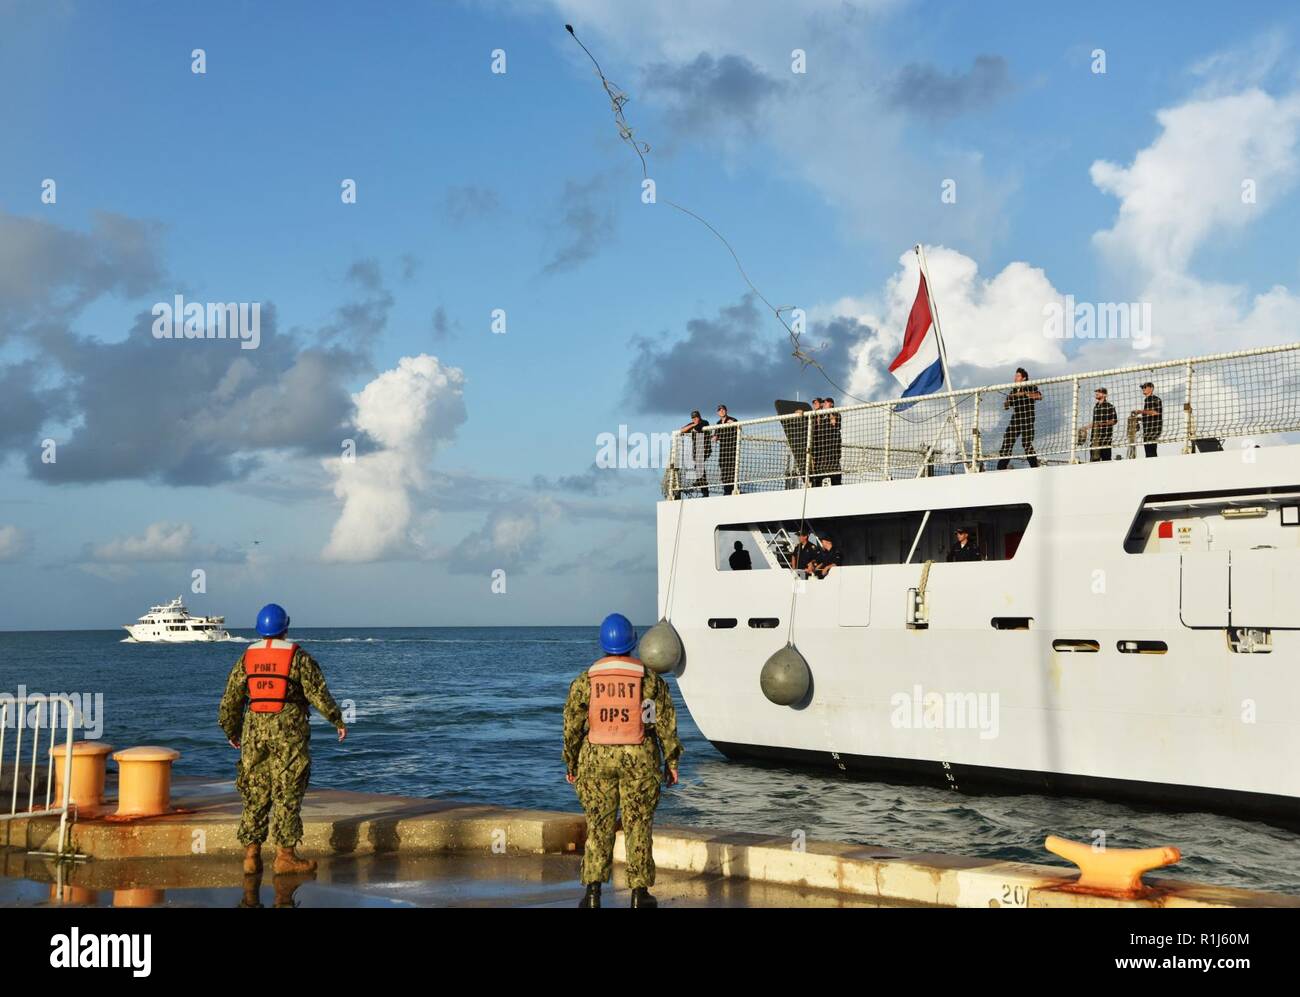 KEY WEST, Florida (Oct. 5, 2018) Naval Air Station Key West Port Operations sailors conduct line handling for HNLMS Friesland (P842), a Holland-class offshore patrol vessel operated by the Royal Netherlands Navy, as it moors at Naval Air Station Key West's Mole Pier. NAS Key West is a state-of-the-art facility for air-to-air combat fighter aircraft of all military services and provides world-class pierside support to U.S. and foreign naval vessels. Stock Photo